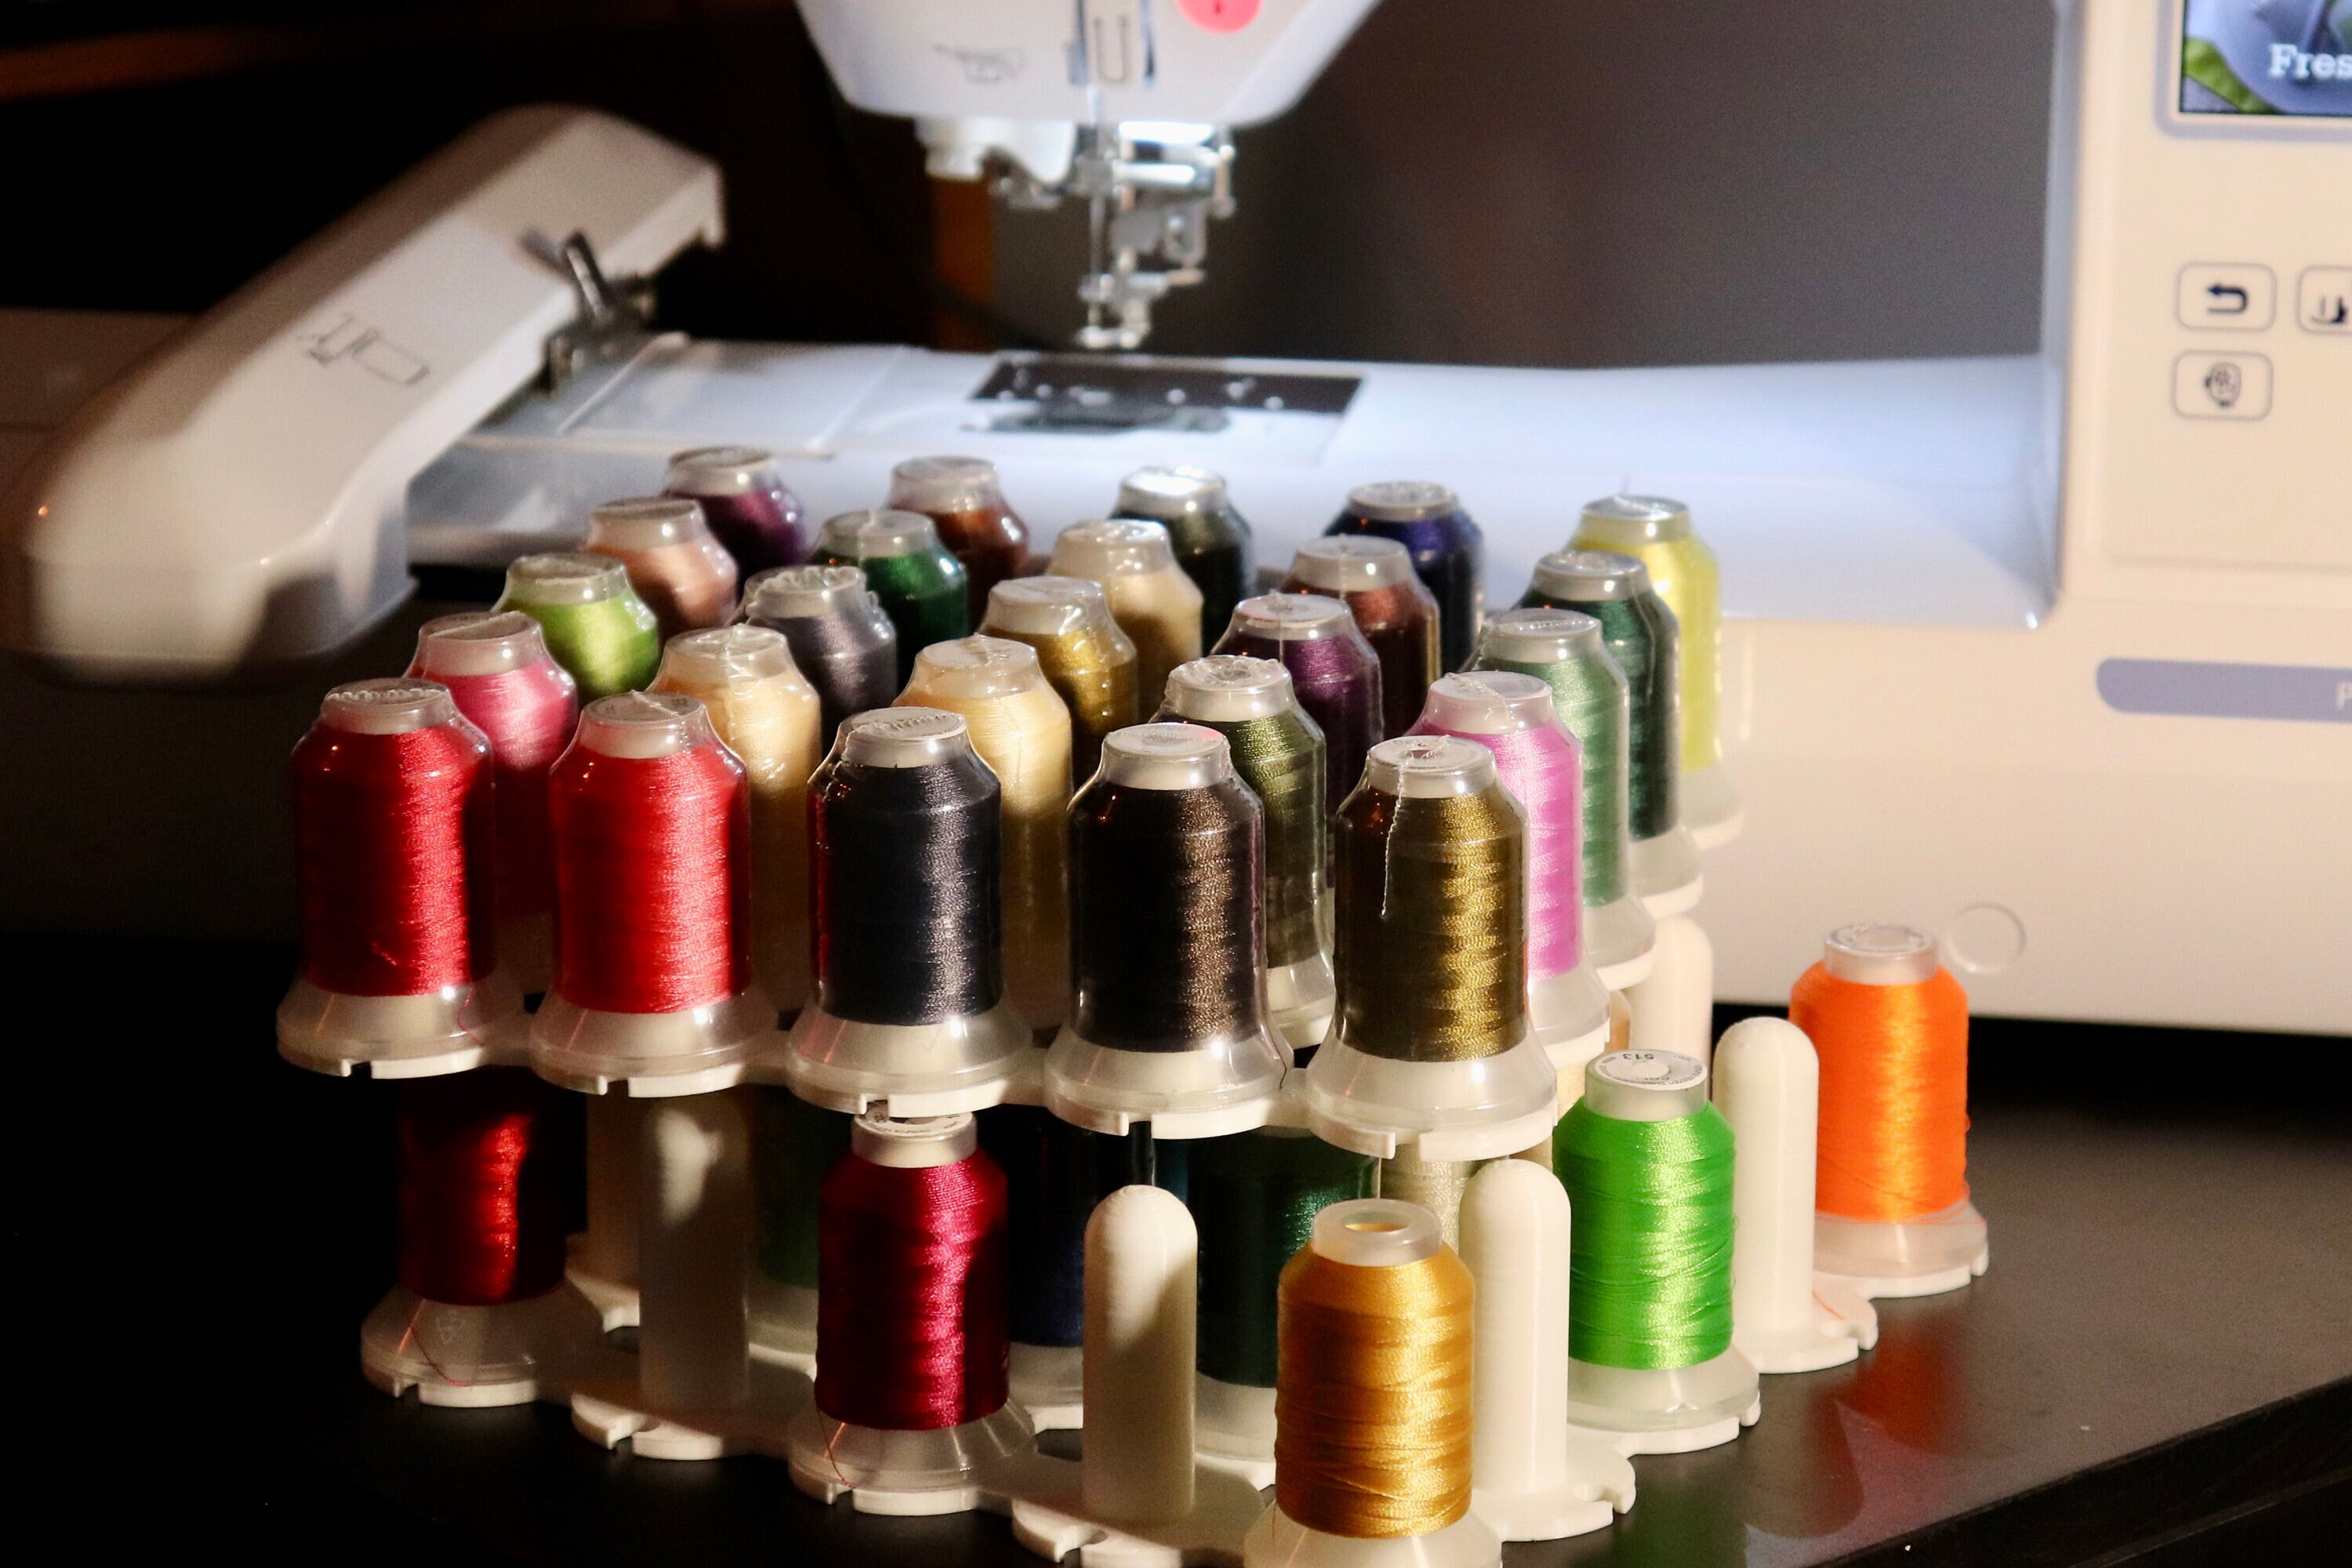 260 Spools Polyester Machine Embroidery Thread Set 40wt works with Brother  Babylock Janome Singer Pfaff Husqvarna